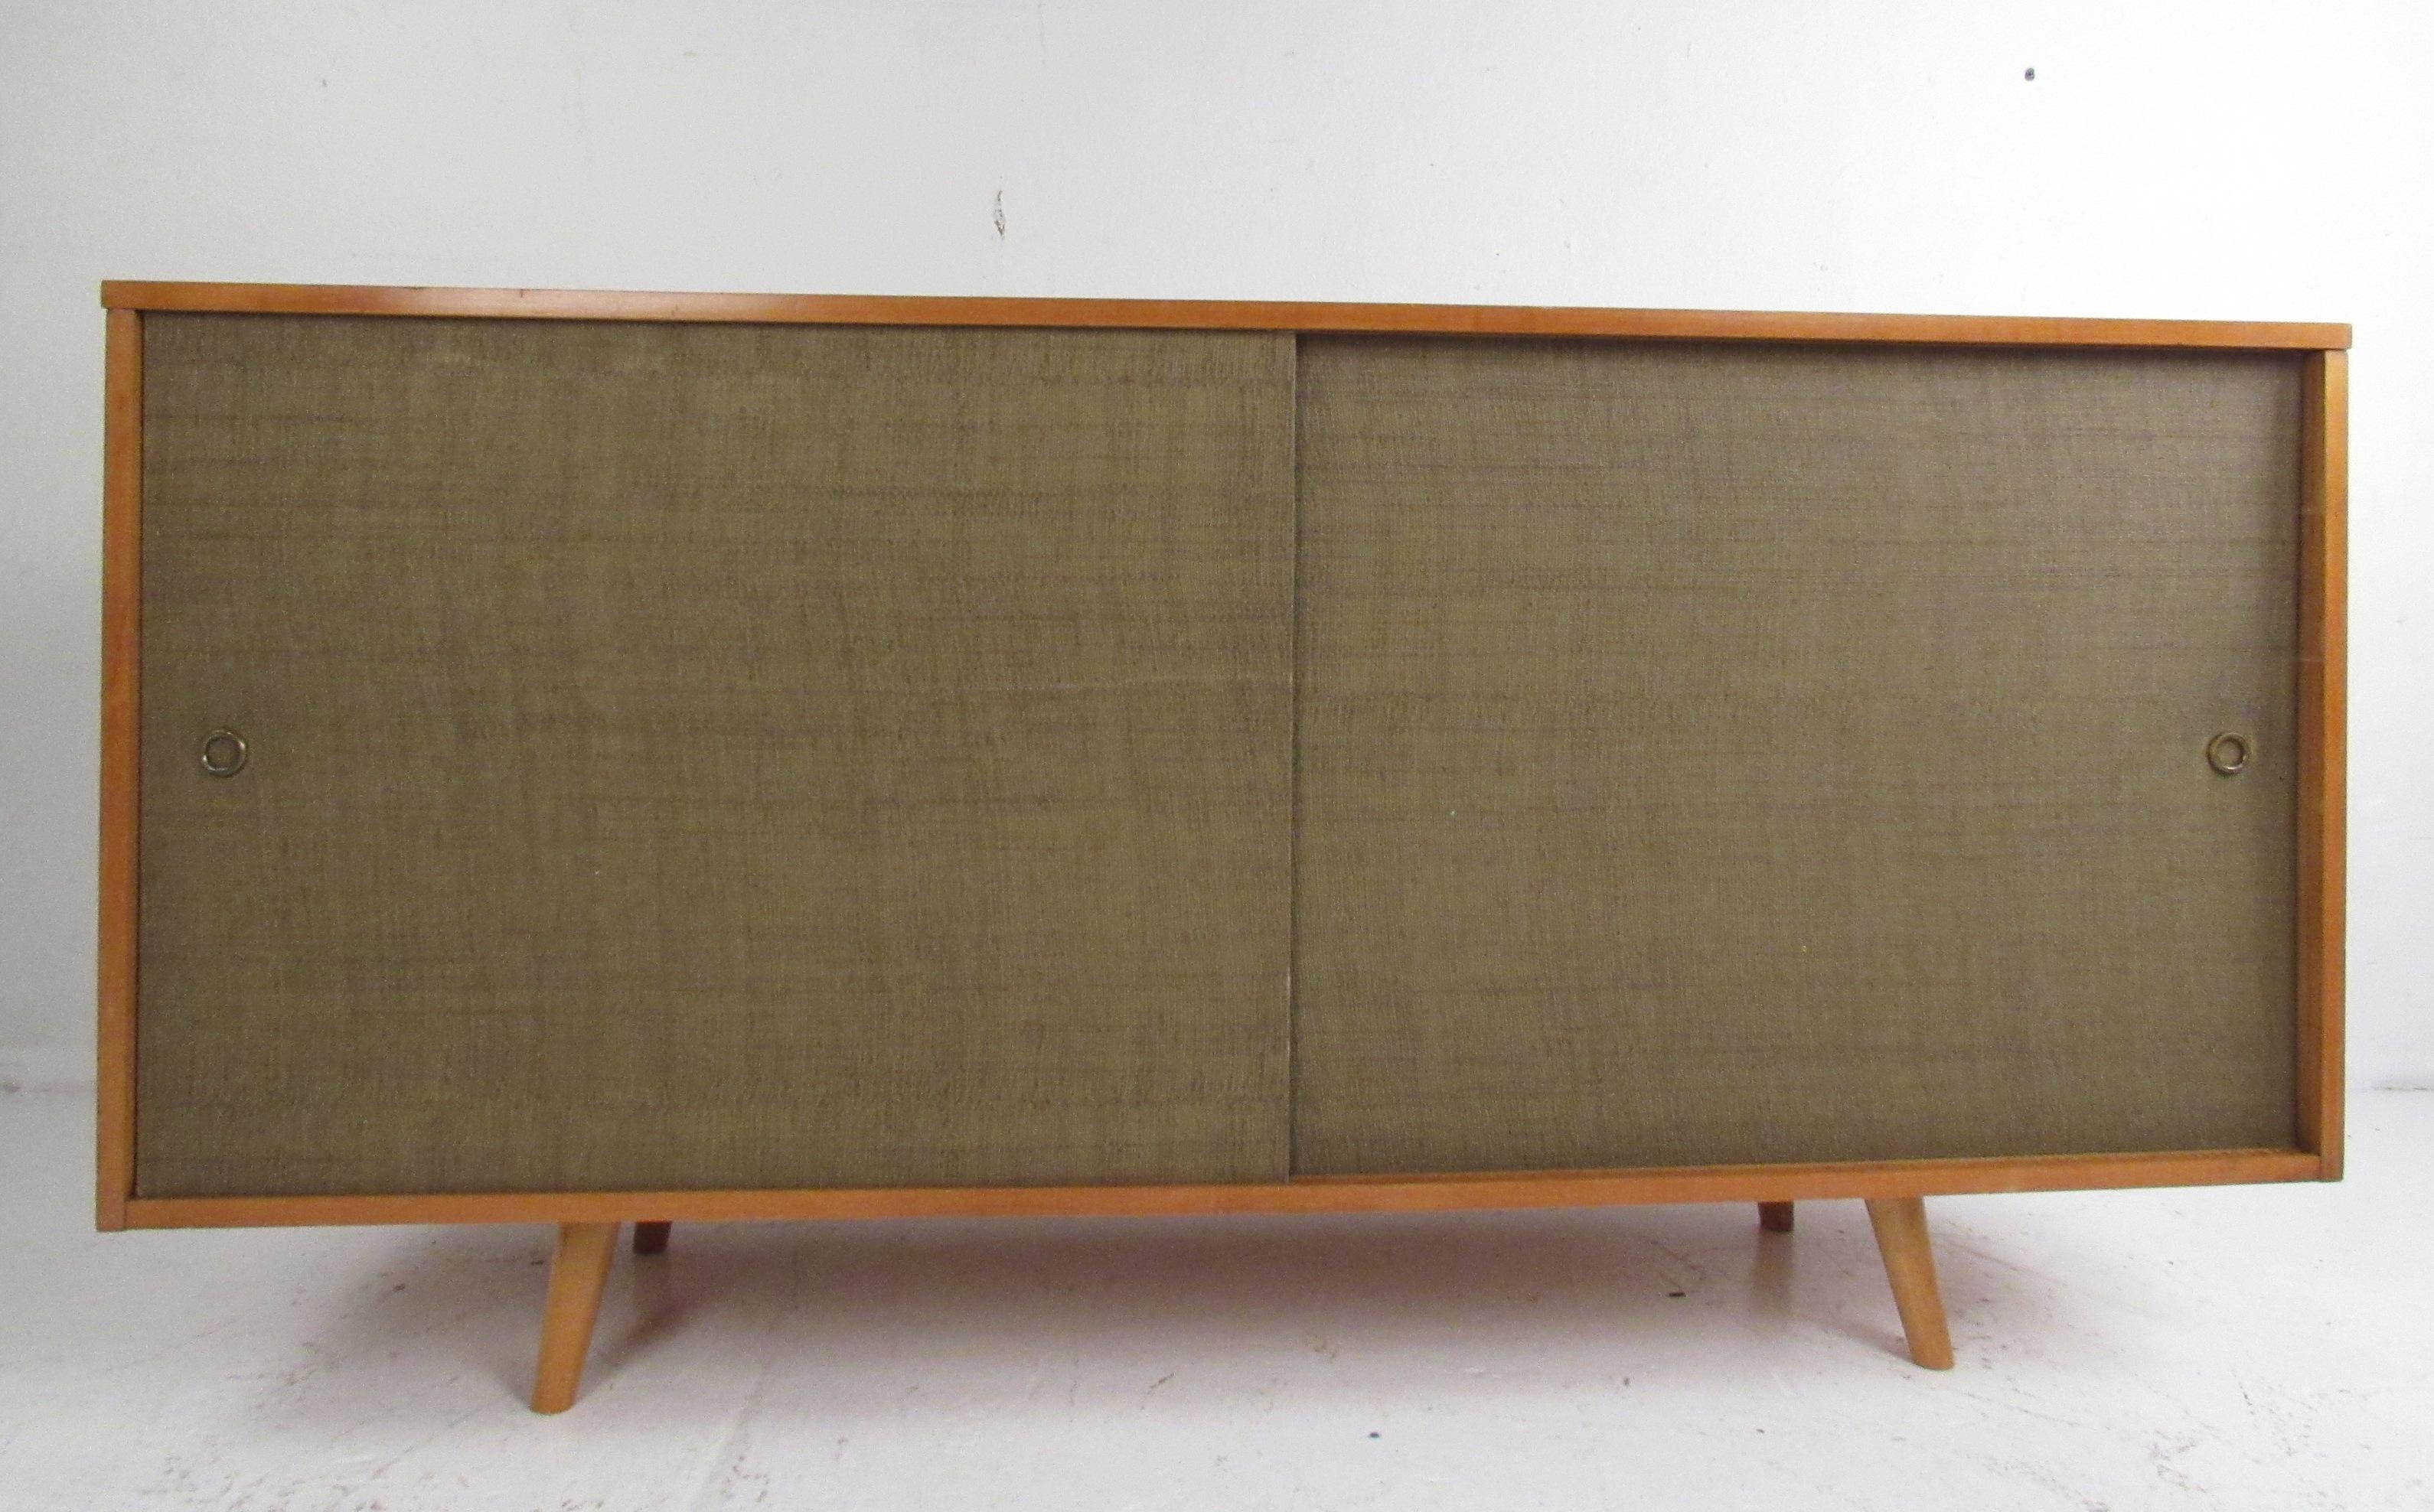 This stylish vintage modern sideboard boasts two sliding doors covered in grasscloth that open up to unveil ample storage space. A sleek design that boasts drawers with cut-out pulls, iconic splayed legs, and a vintage maple finish. This versatile